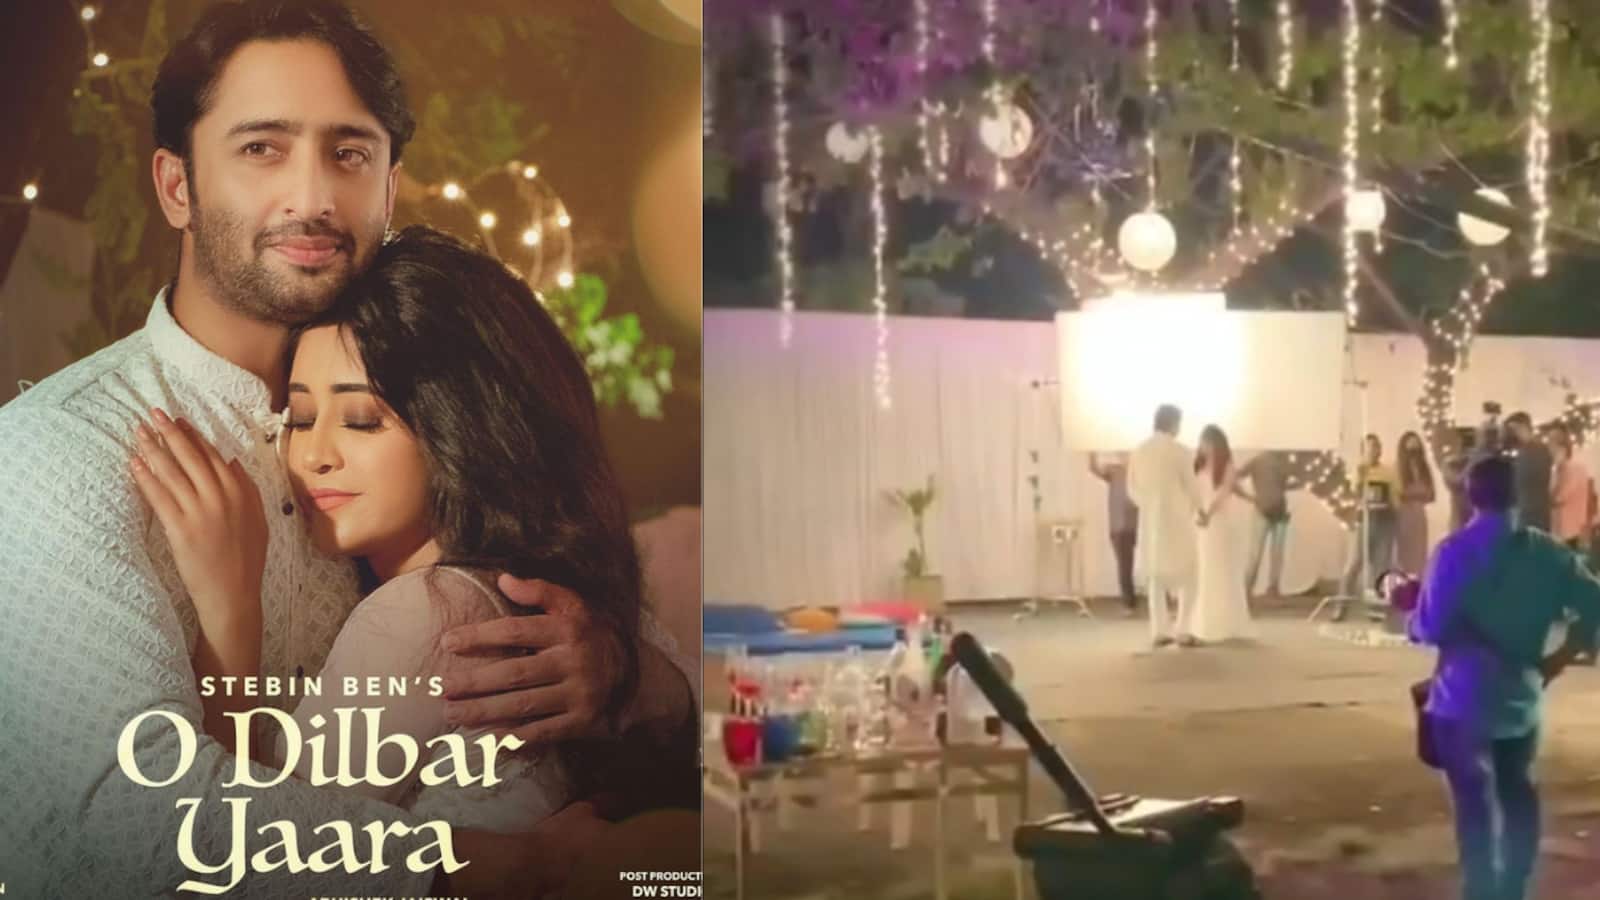 Shaheer Sheikh And Shivangi Joshi Make For The Cutest Romantic Couple In Fisrt Poster Of O